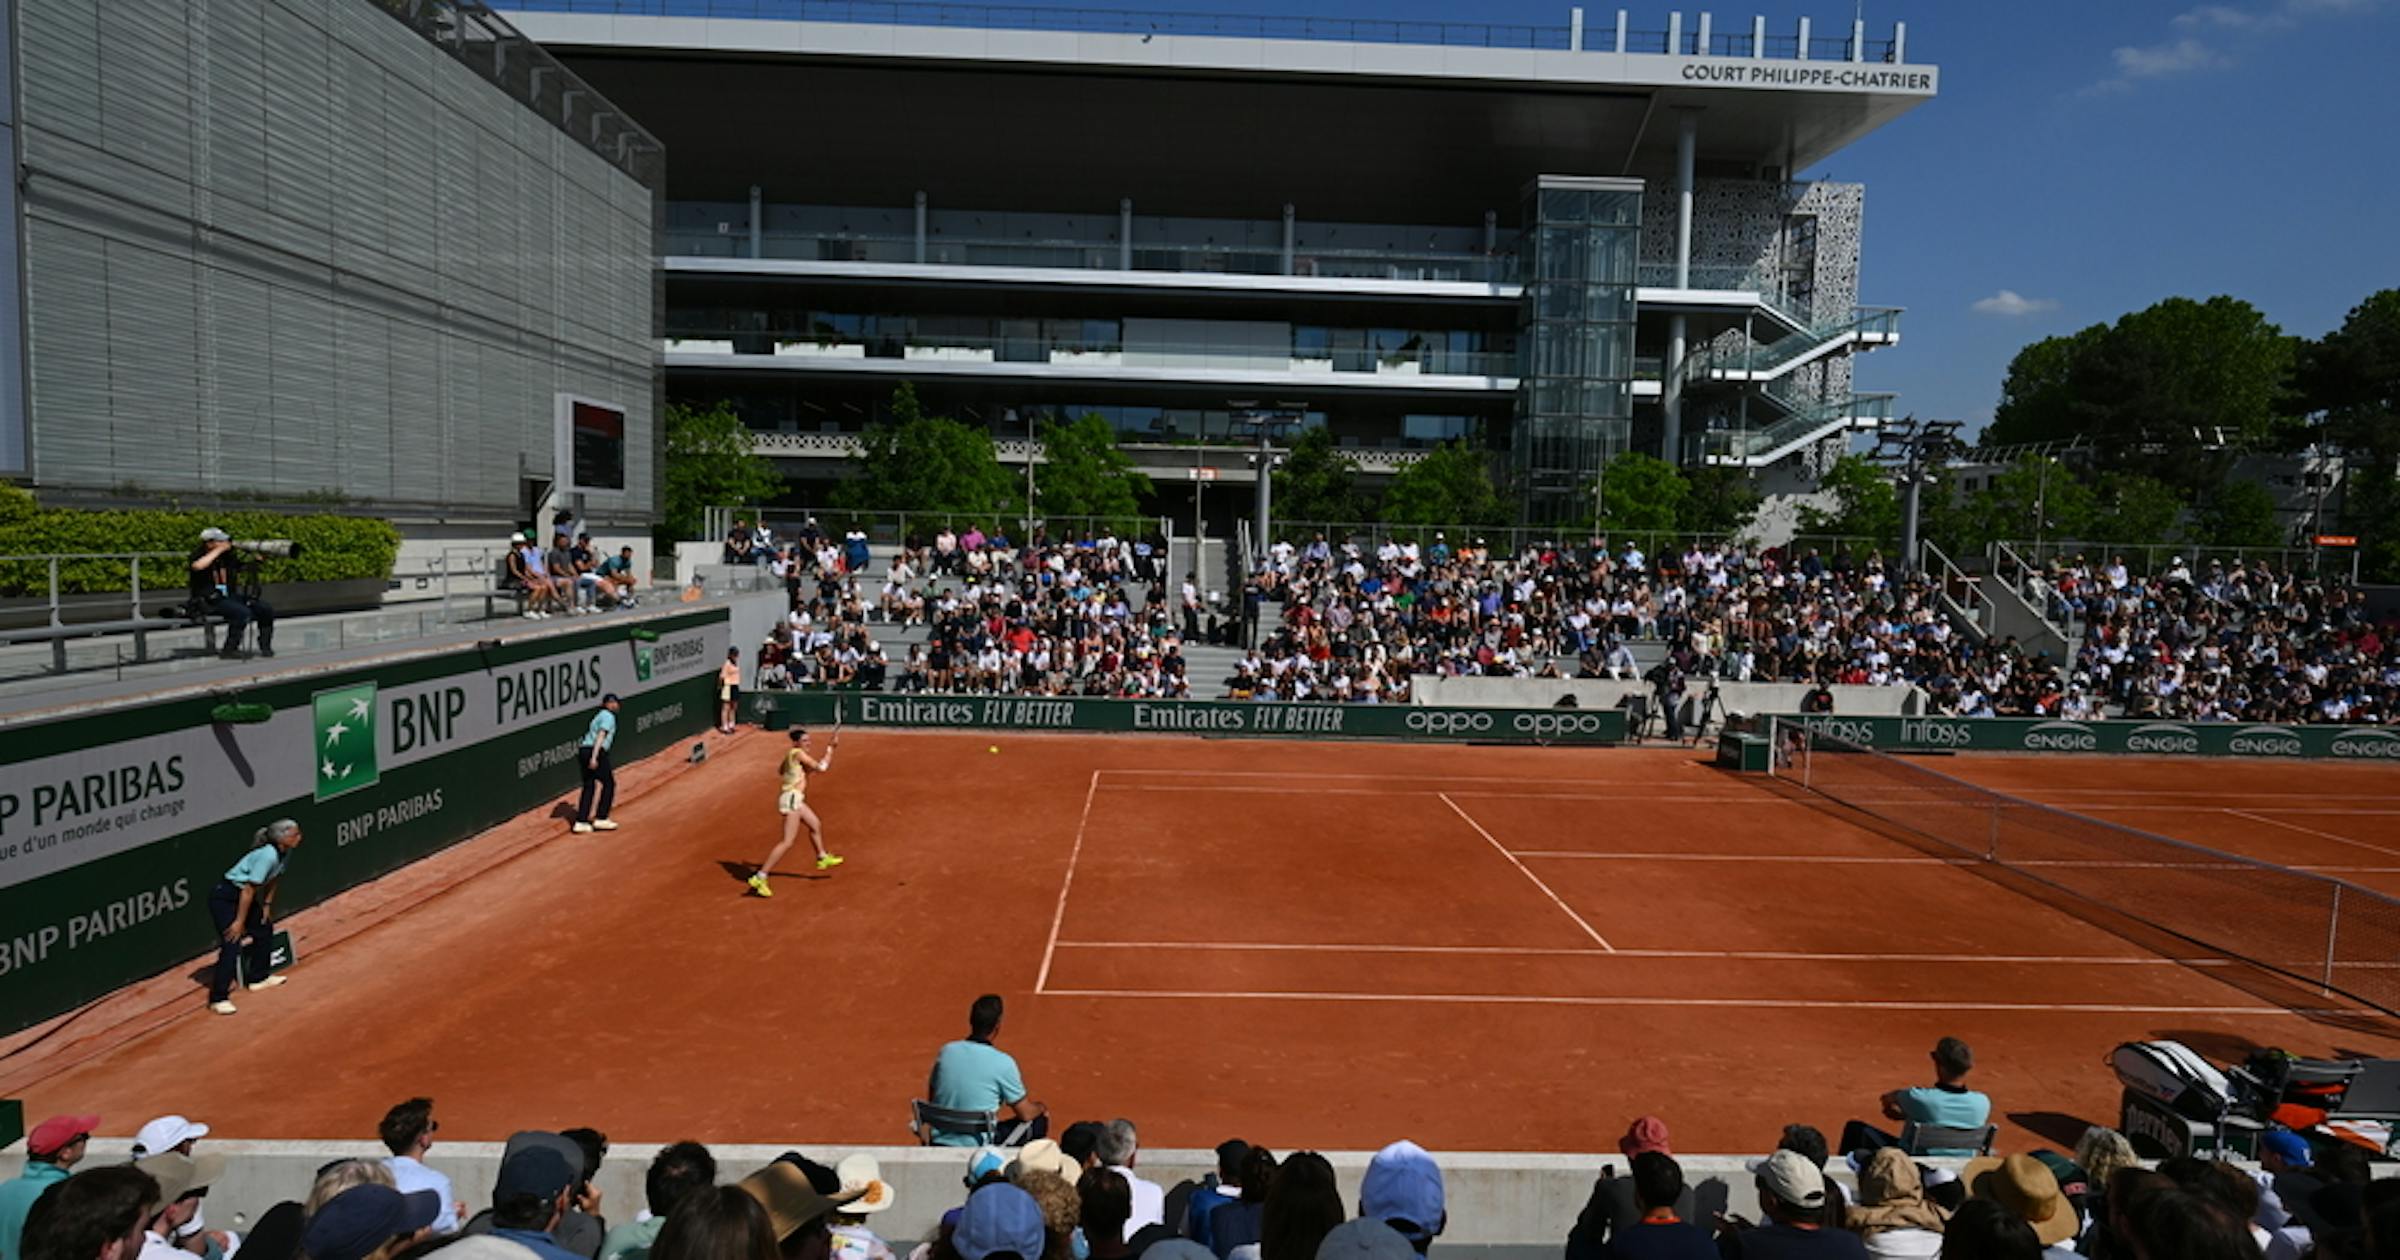 On Monday May 20, observe the French at Roland-Garros